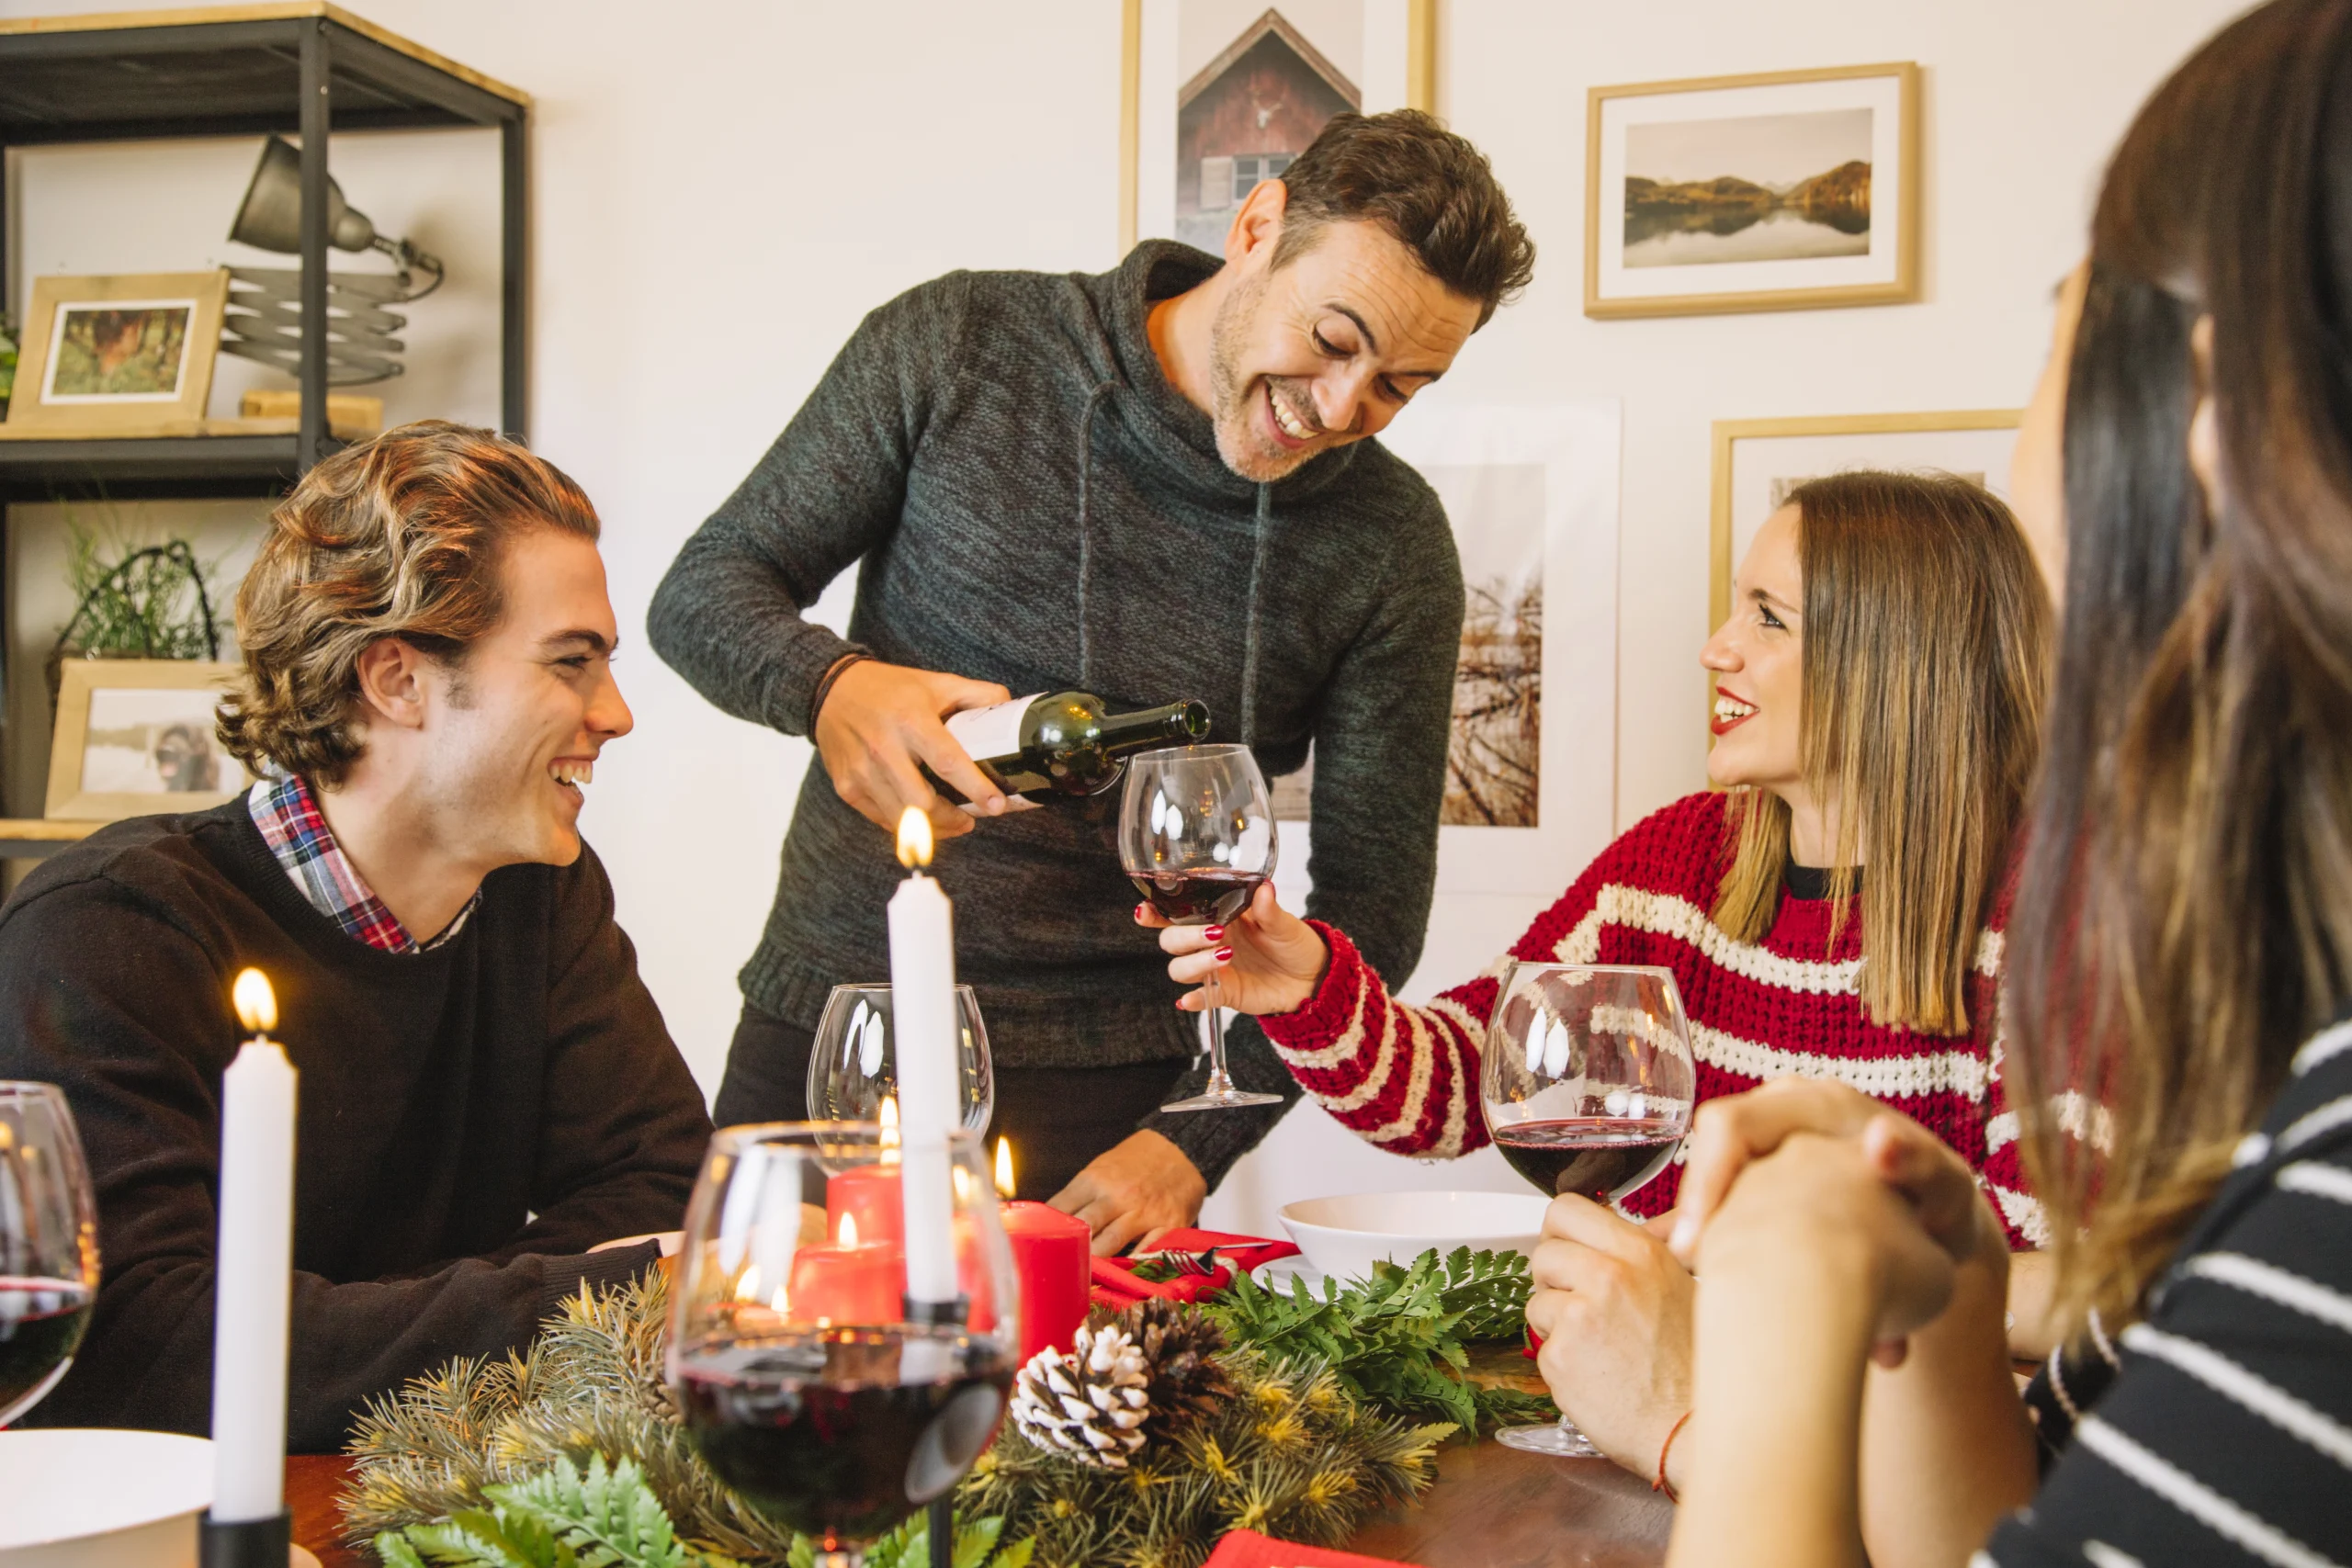 Create cherished memories with a meticulously organized Christmas dinner for your loved ones.